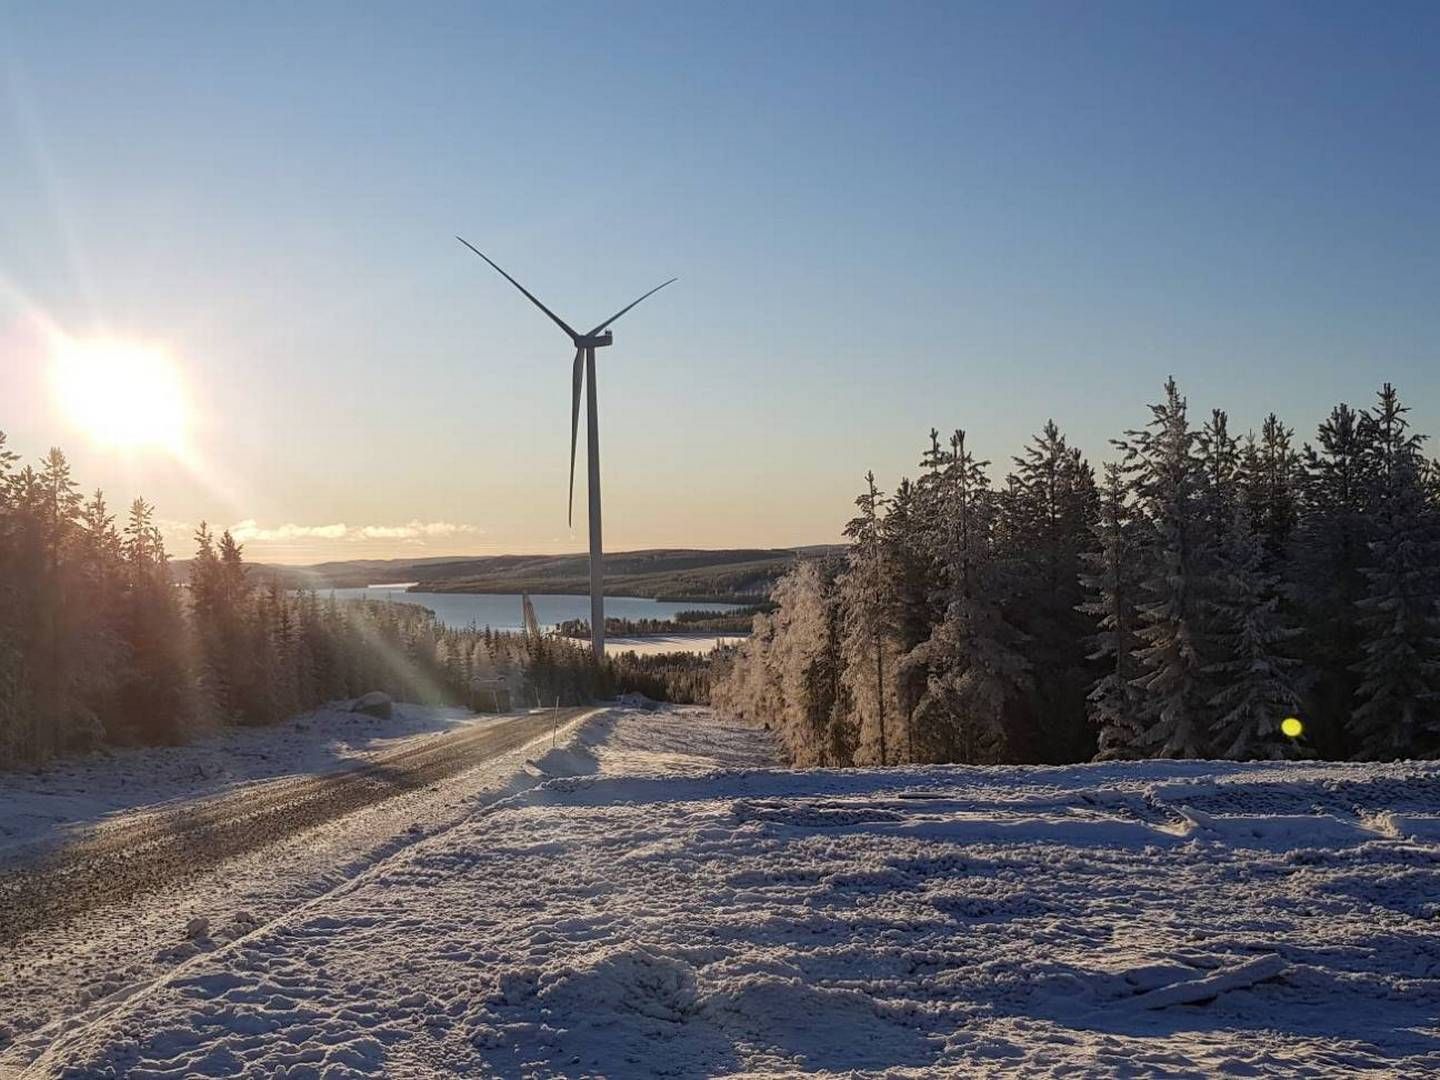 Once operational, the wind turbines will be able to produce enough green power to supply around 22,000 households in Hesse with green electricity every year. | Photo: Rwe